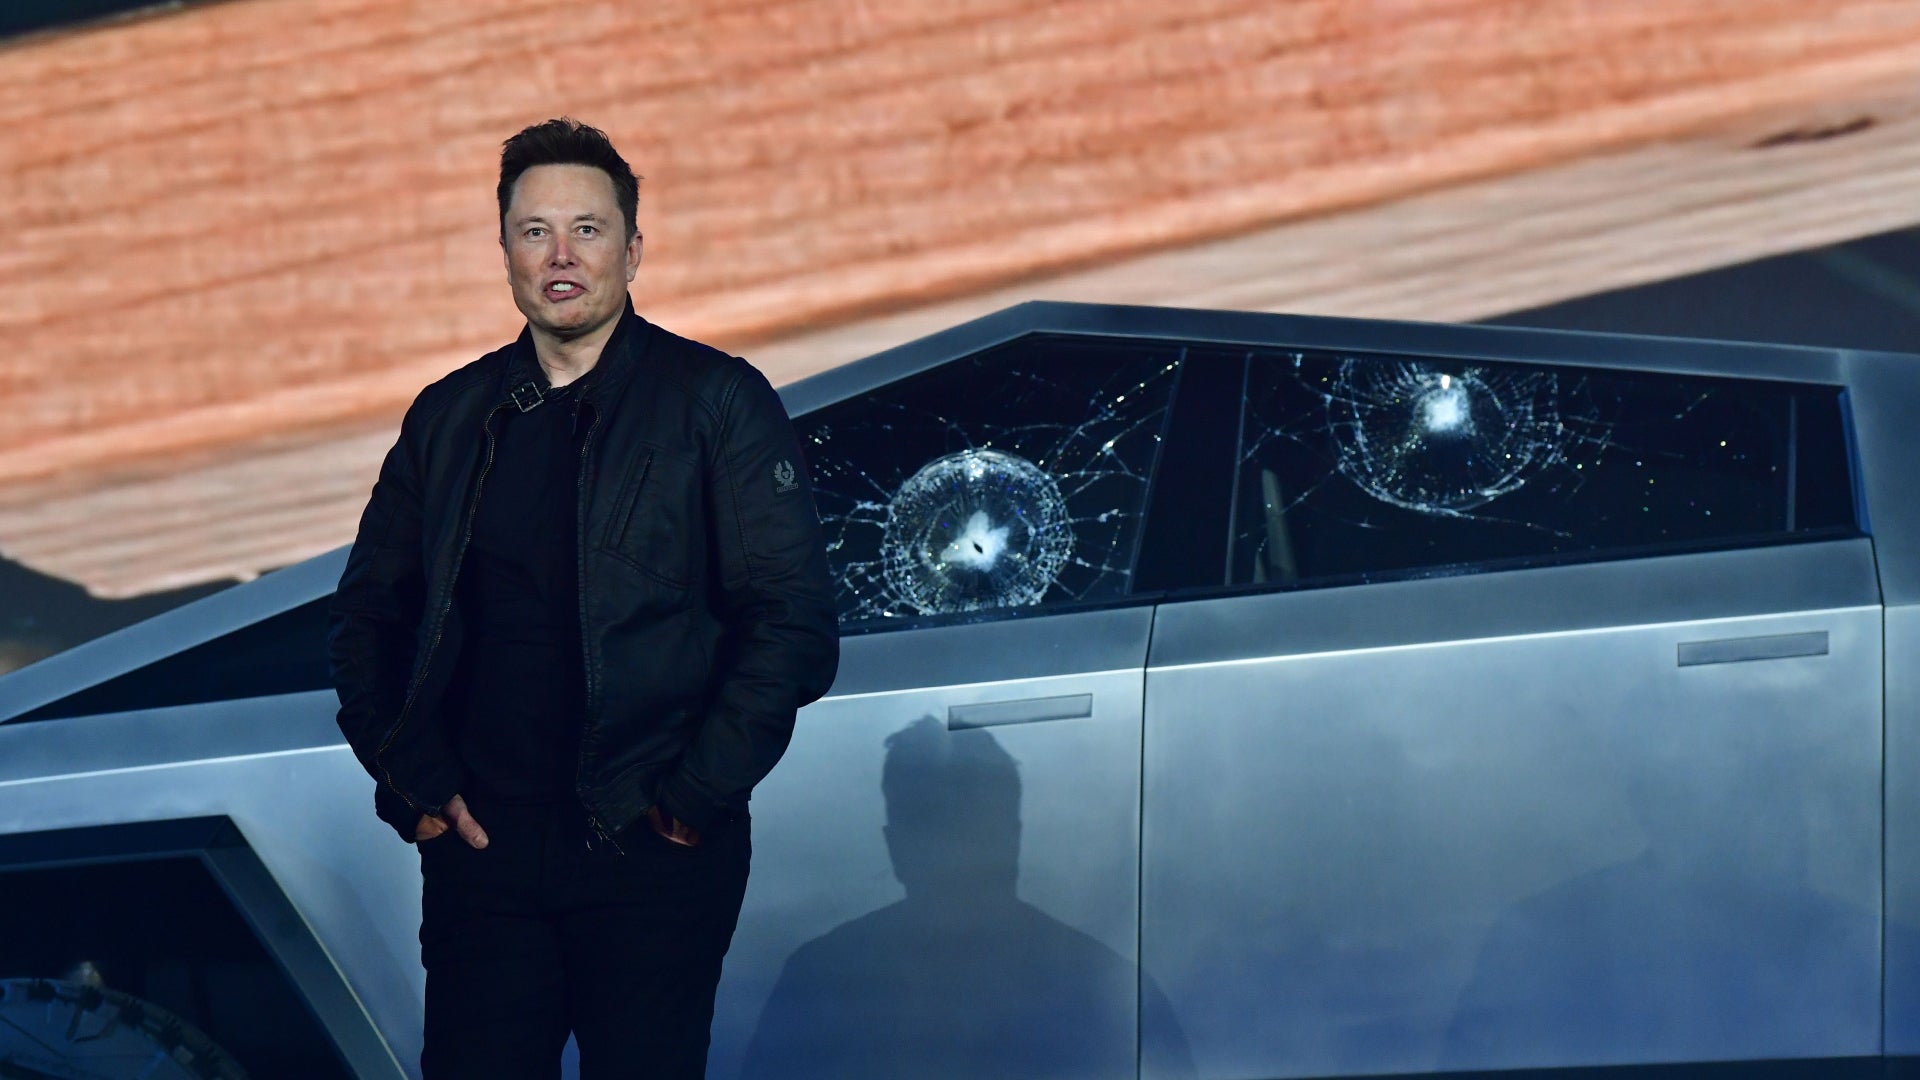 Elon Musk Explains Why the Tesla Cybertruck’s Armored Windows Broke On Stage